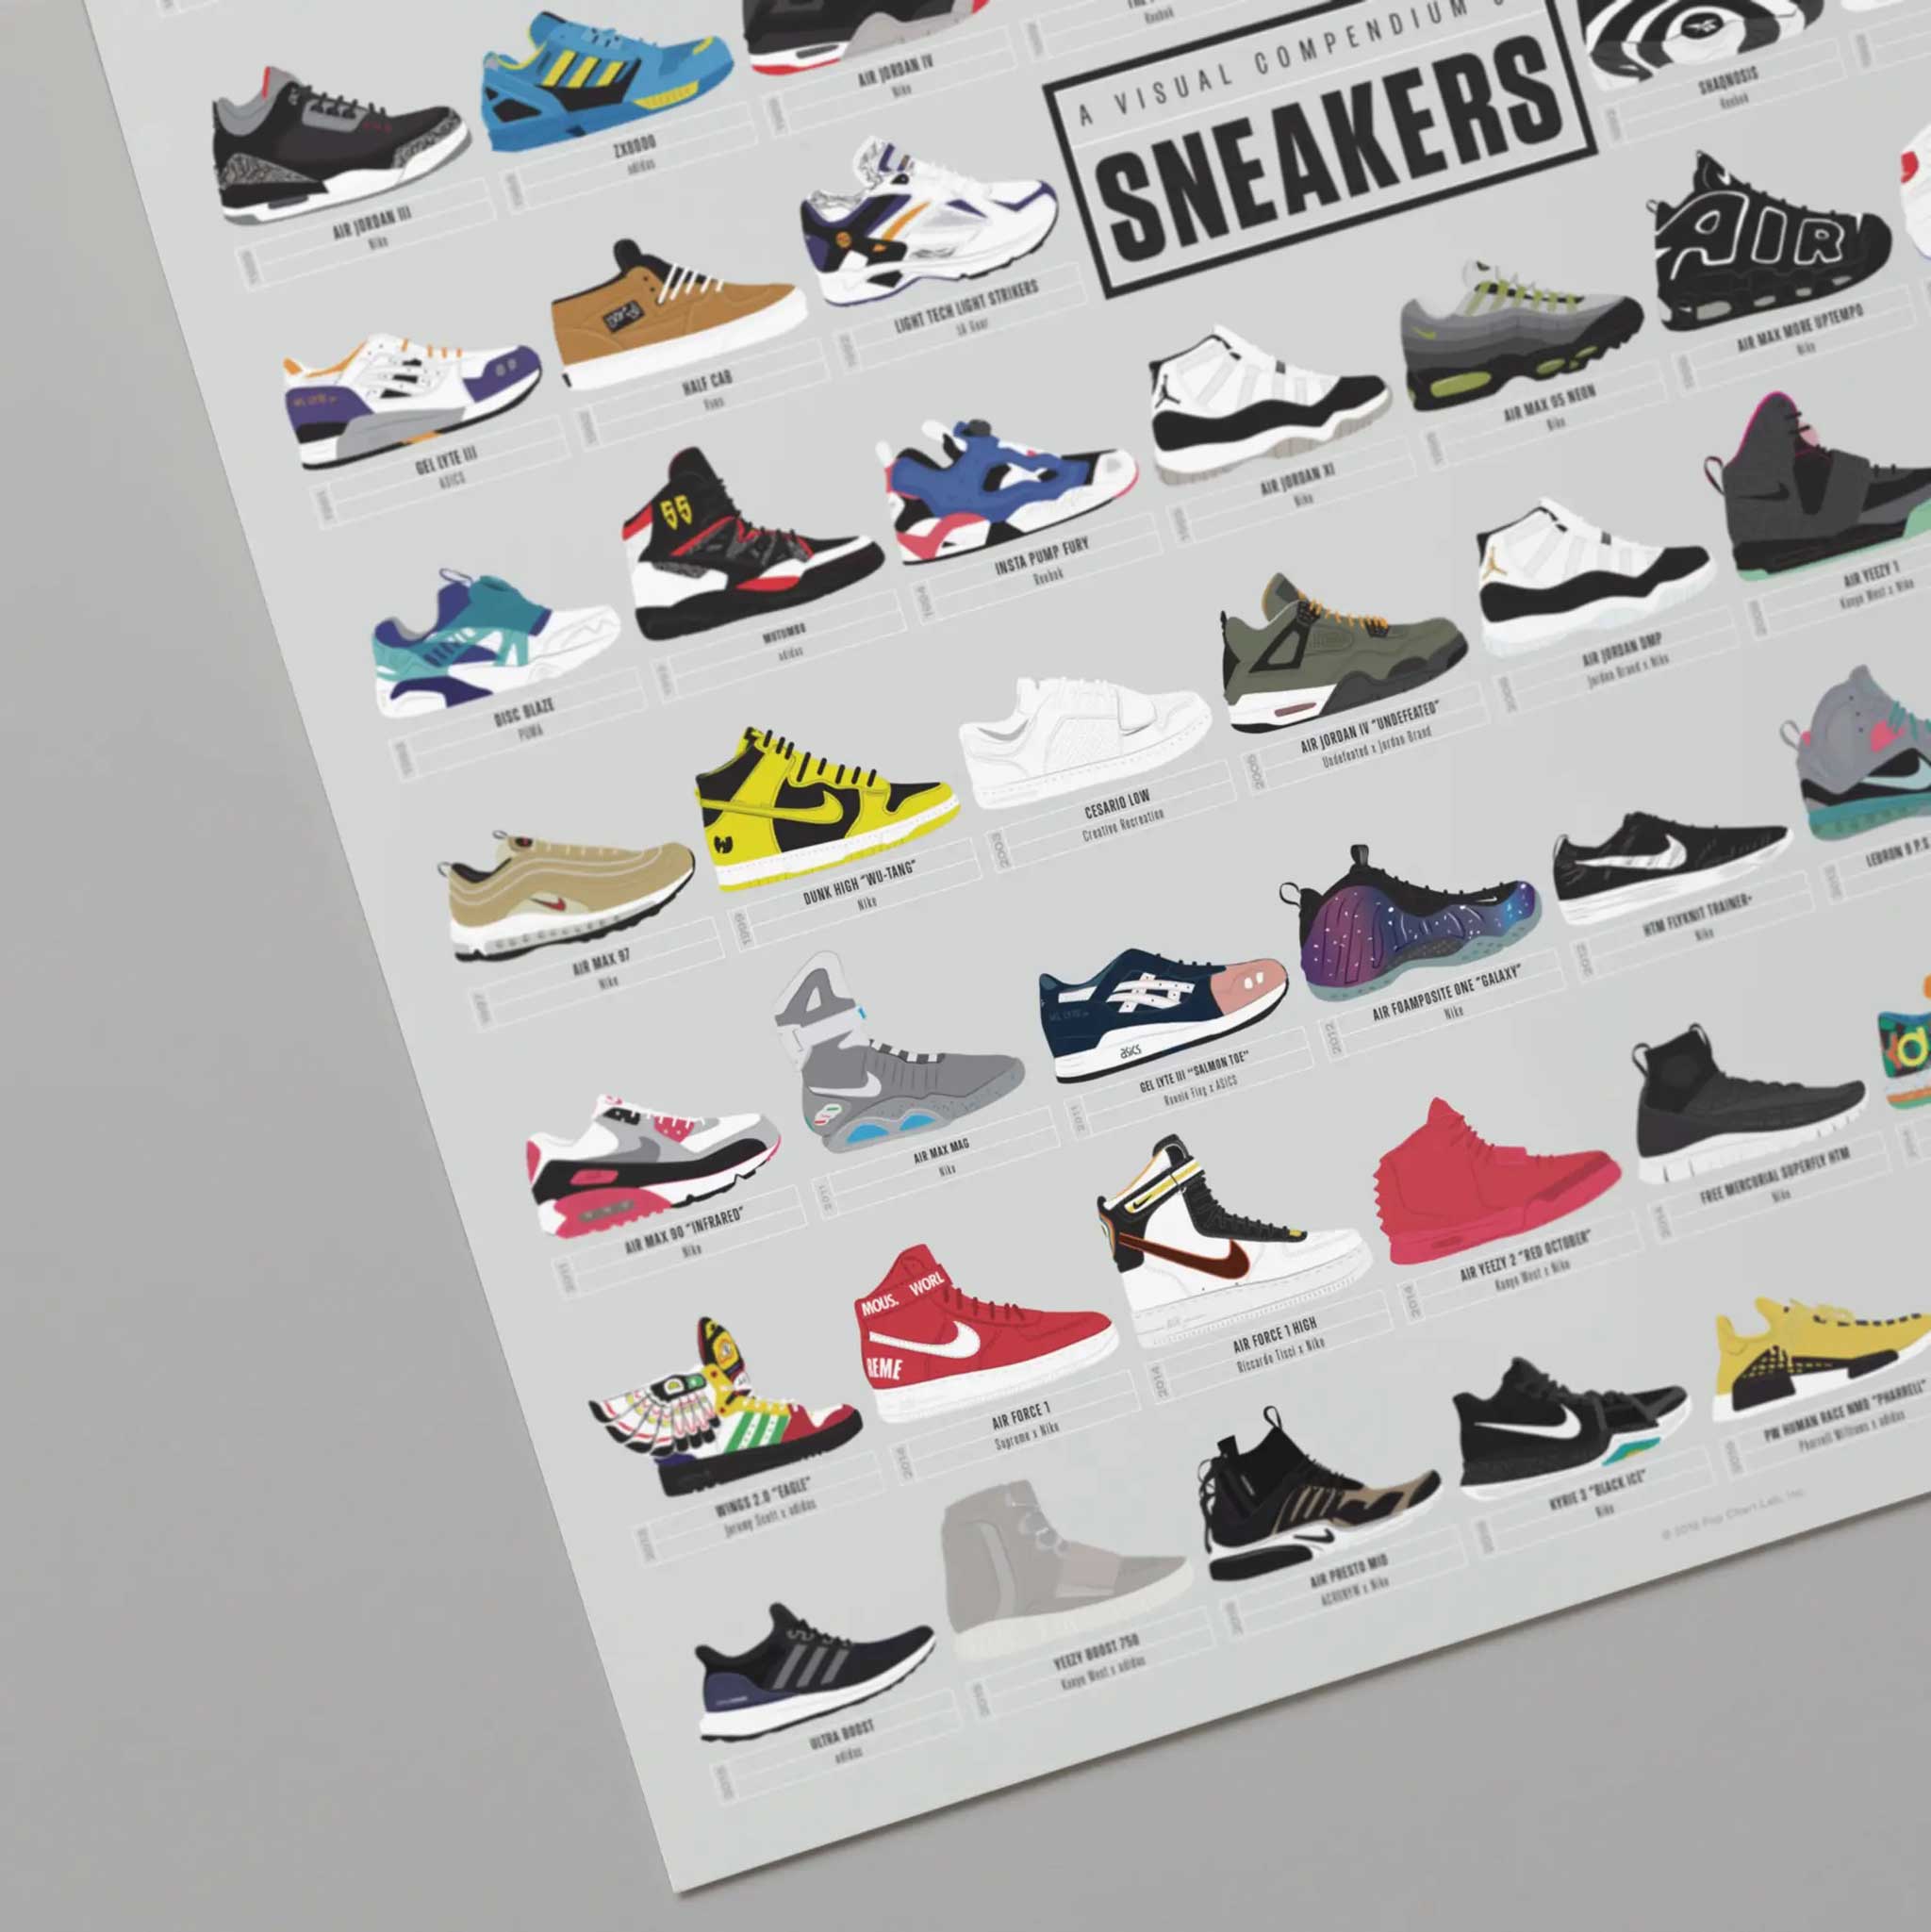 Pop Chart Lab A Visual Compendium of Sneakers Poster Print, 24